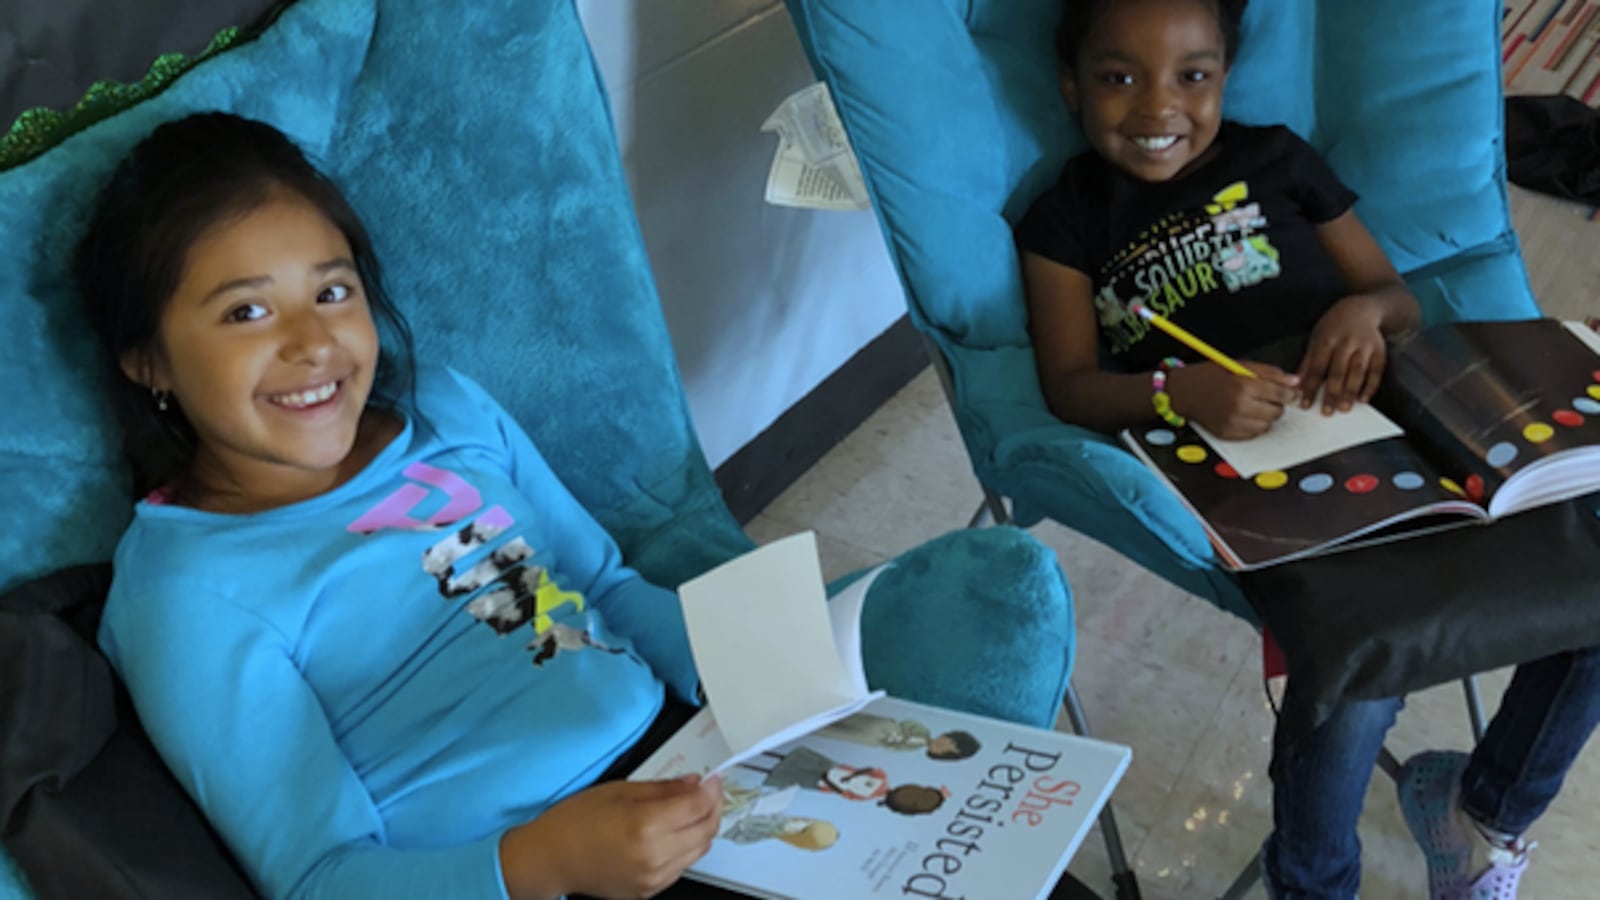 More than 7,700 children took part this summer in 250 school-based reading camps across Tennessee as part of the state's Read to be Ready initiative.